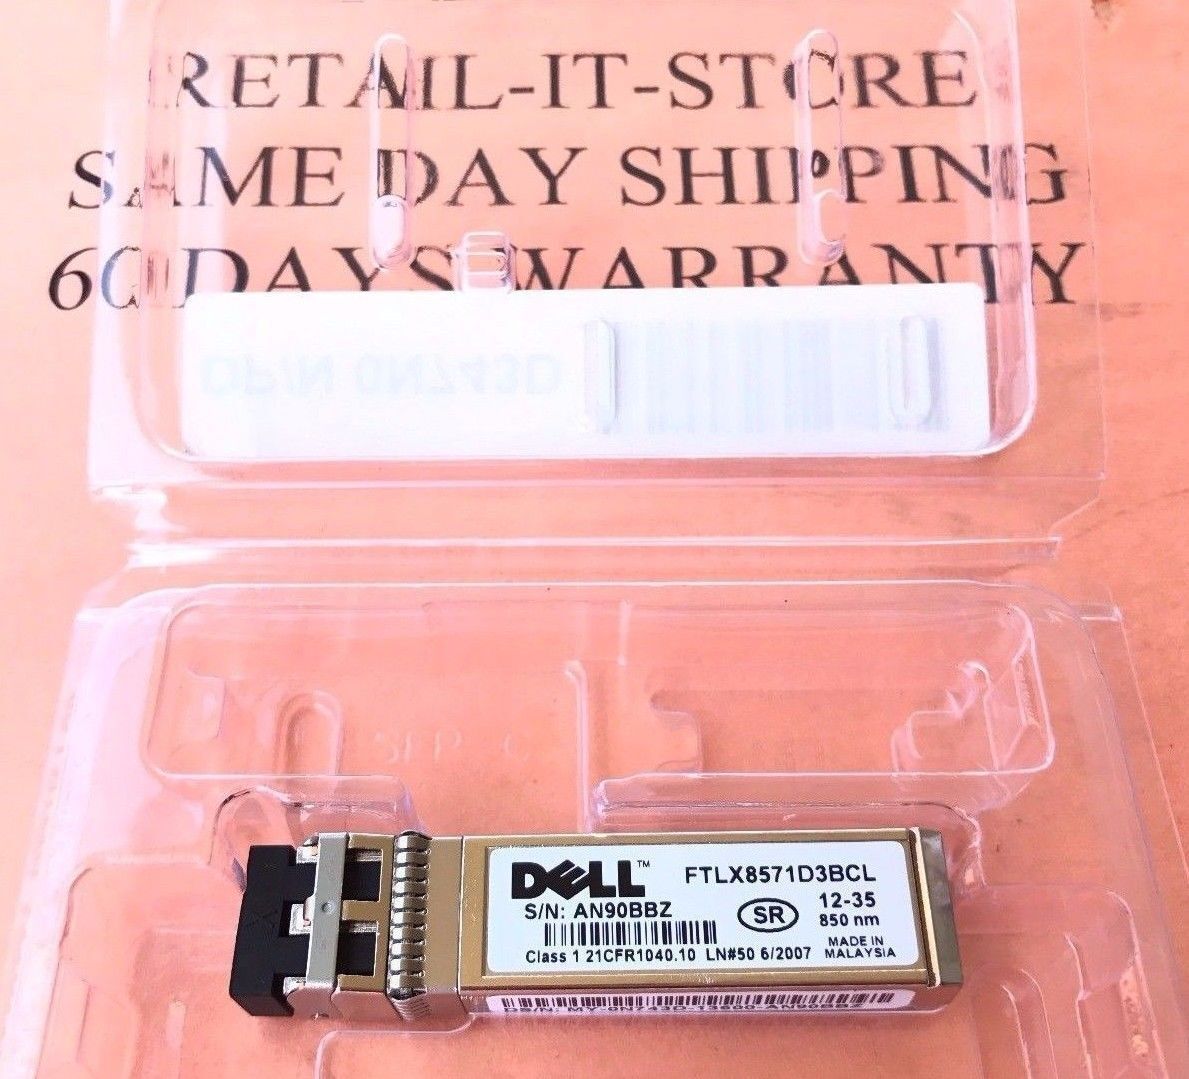 Genuine Dell 10GbE SFP+ SR for Dell Networking N4032 N4032F N4000 series w/60day